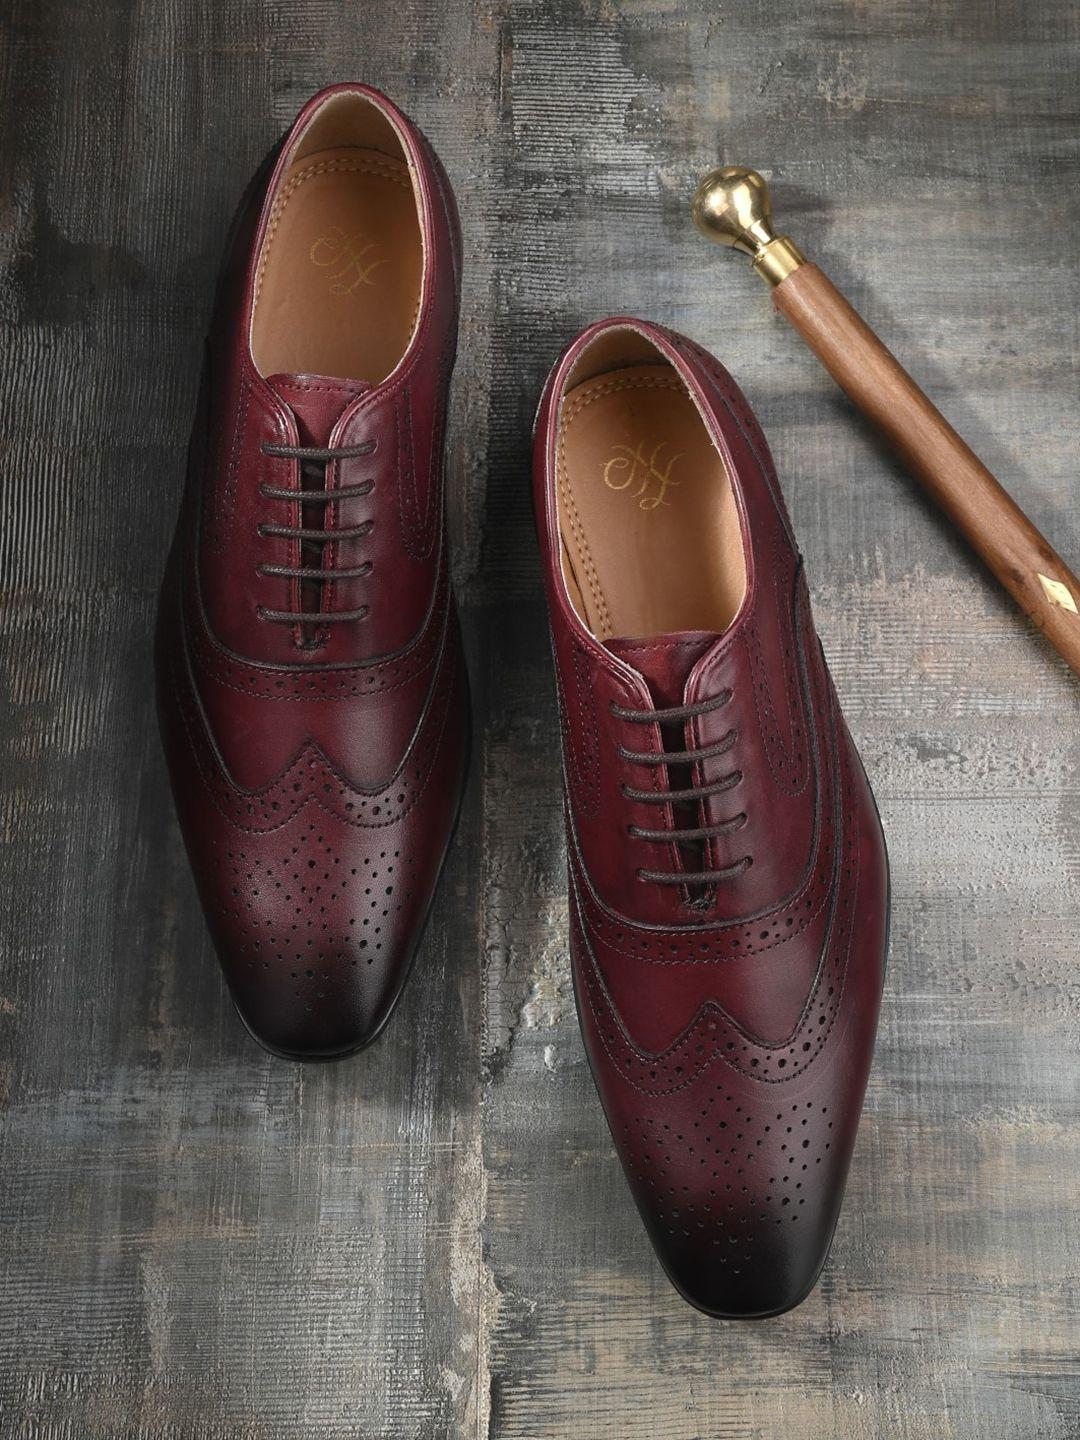 house of pataudi men perforated leather formal brogues